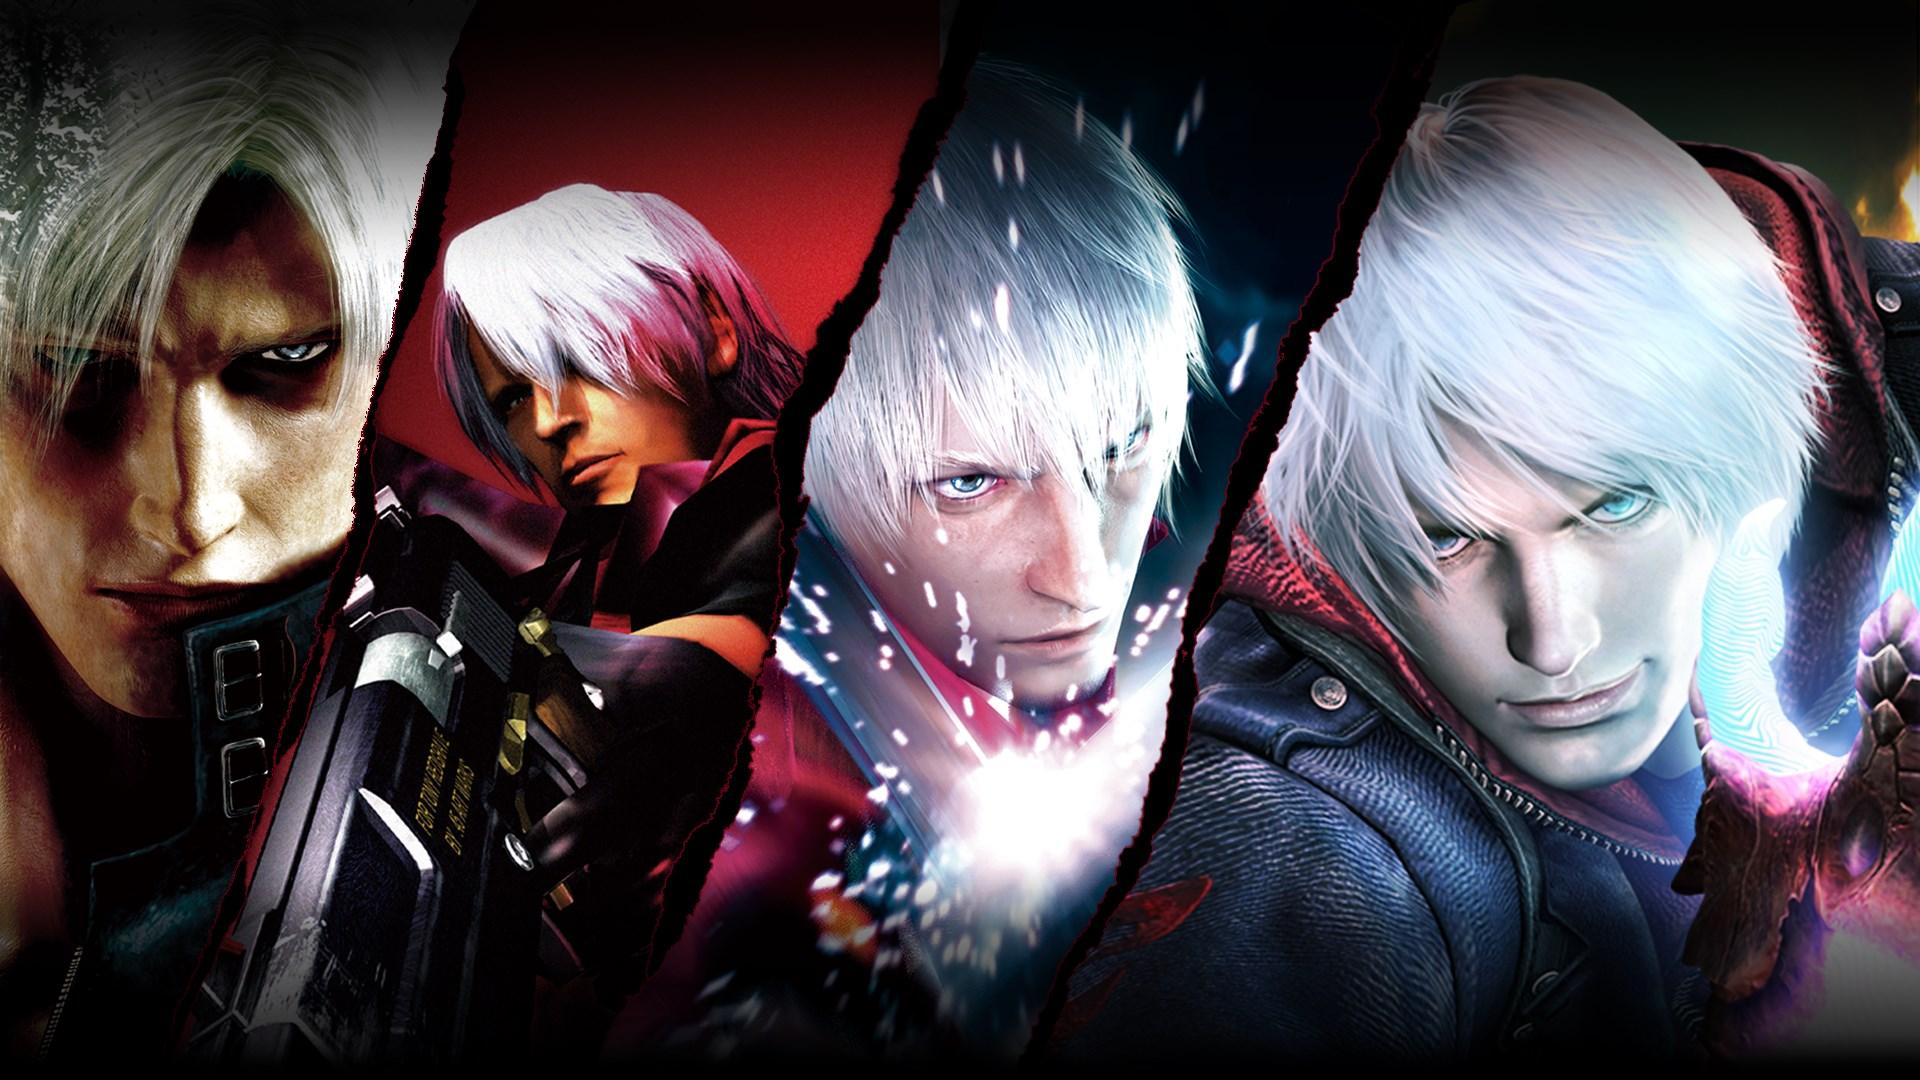 devil-may-cry-3-special-edition-wallpapers-wallpaper-cave